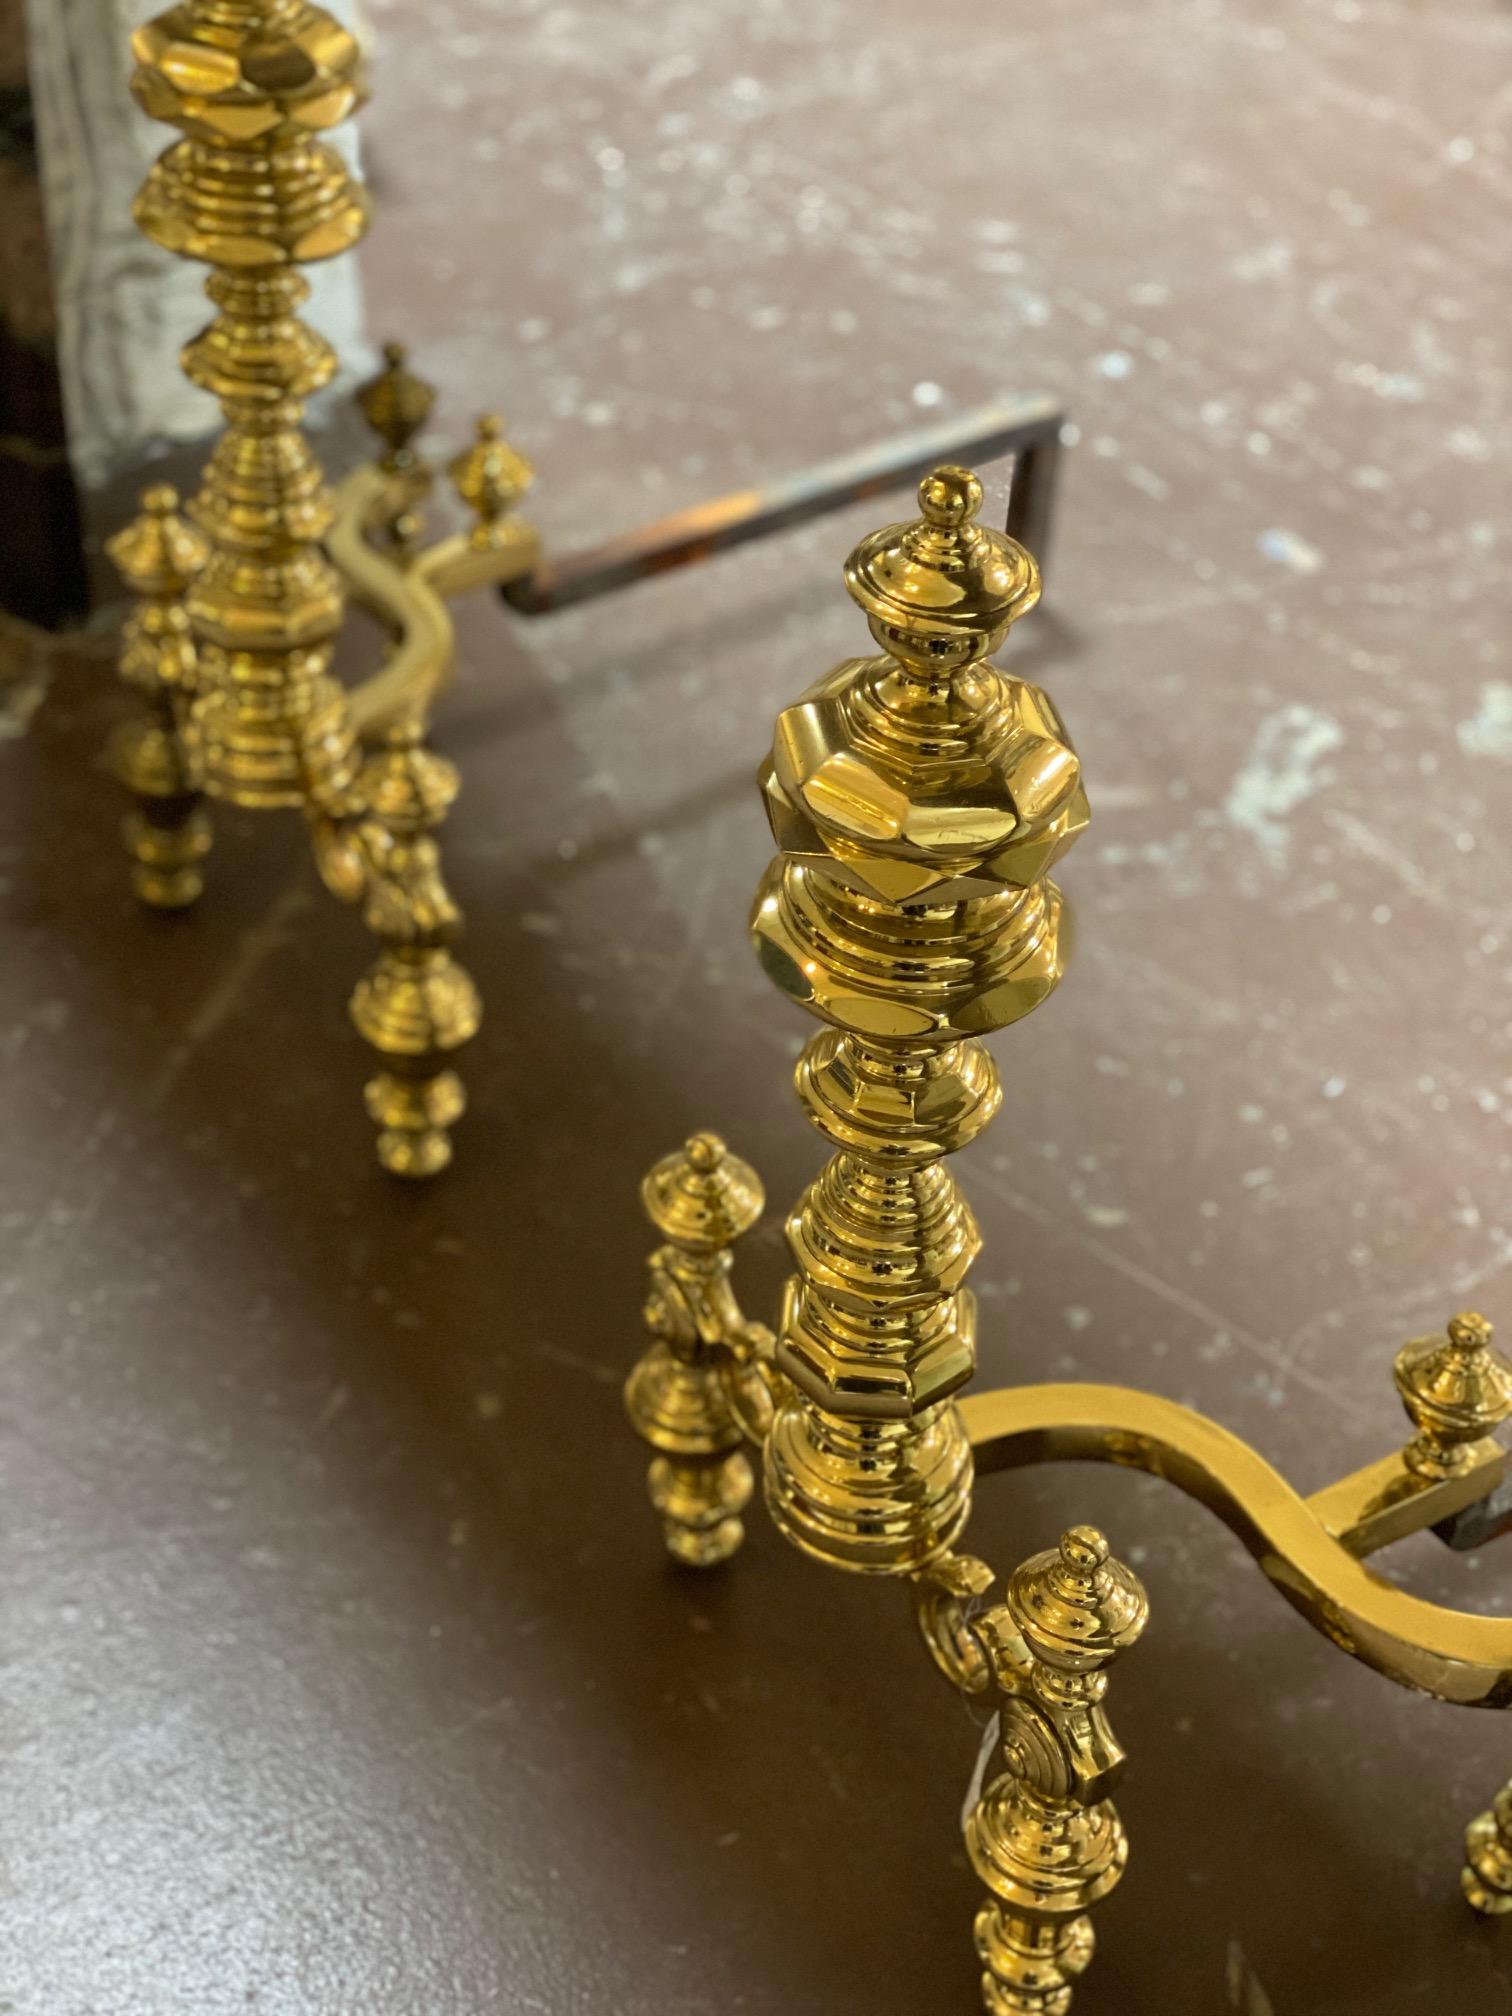 Pair of Dutch Baroque style andirons, made of polished bronze and wrought iron. 

These antique bronze-fronted French Chenets (andirons) have a lovely reflective polished patina. Andirons, Chenets, fire-dogs, moon idols, moon horns, are just some